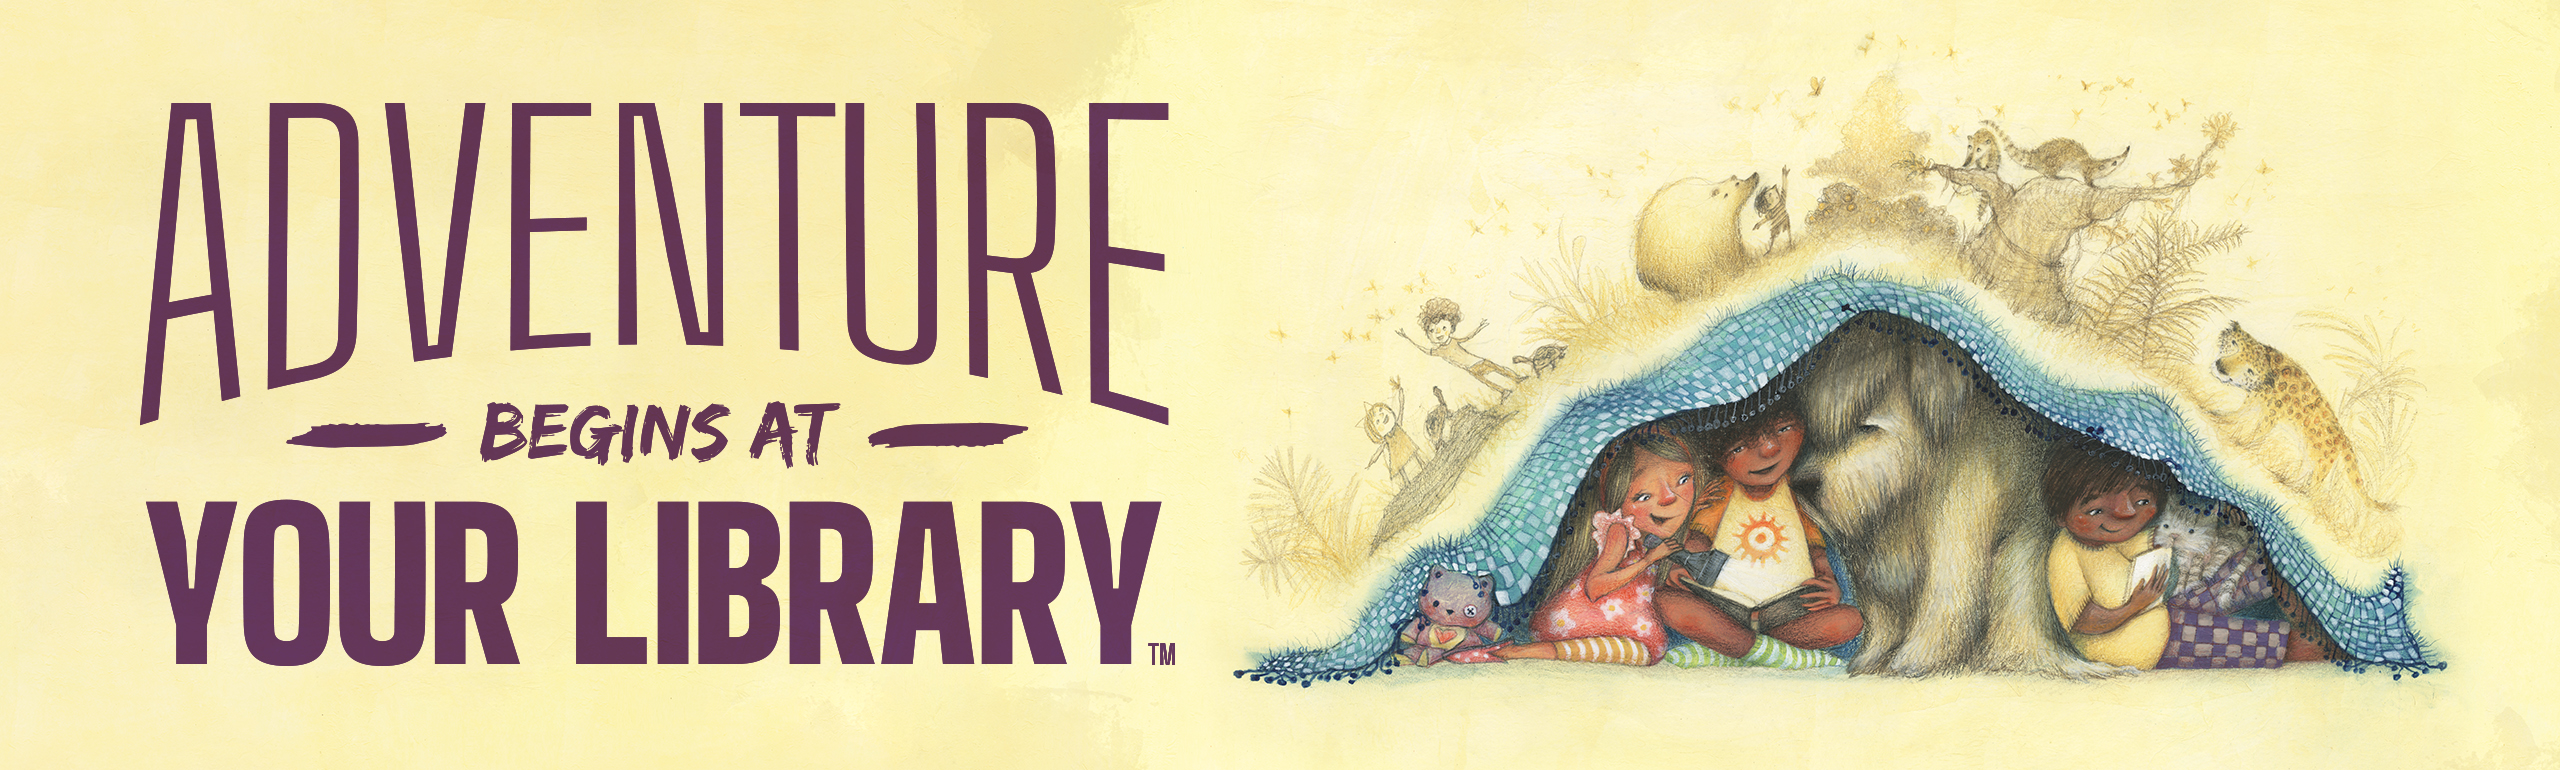 Adventure Begins at Your Library logo with children and dog reading under blanket.